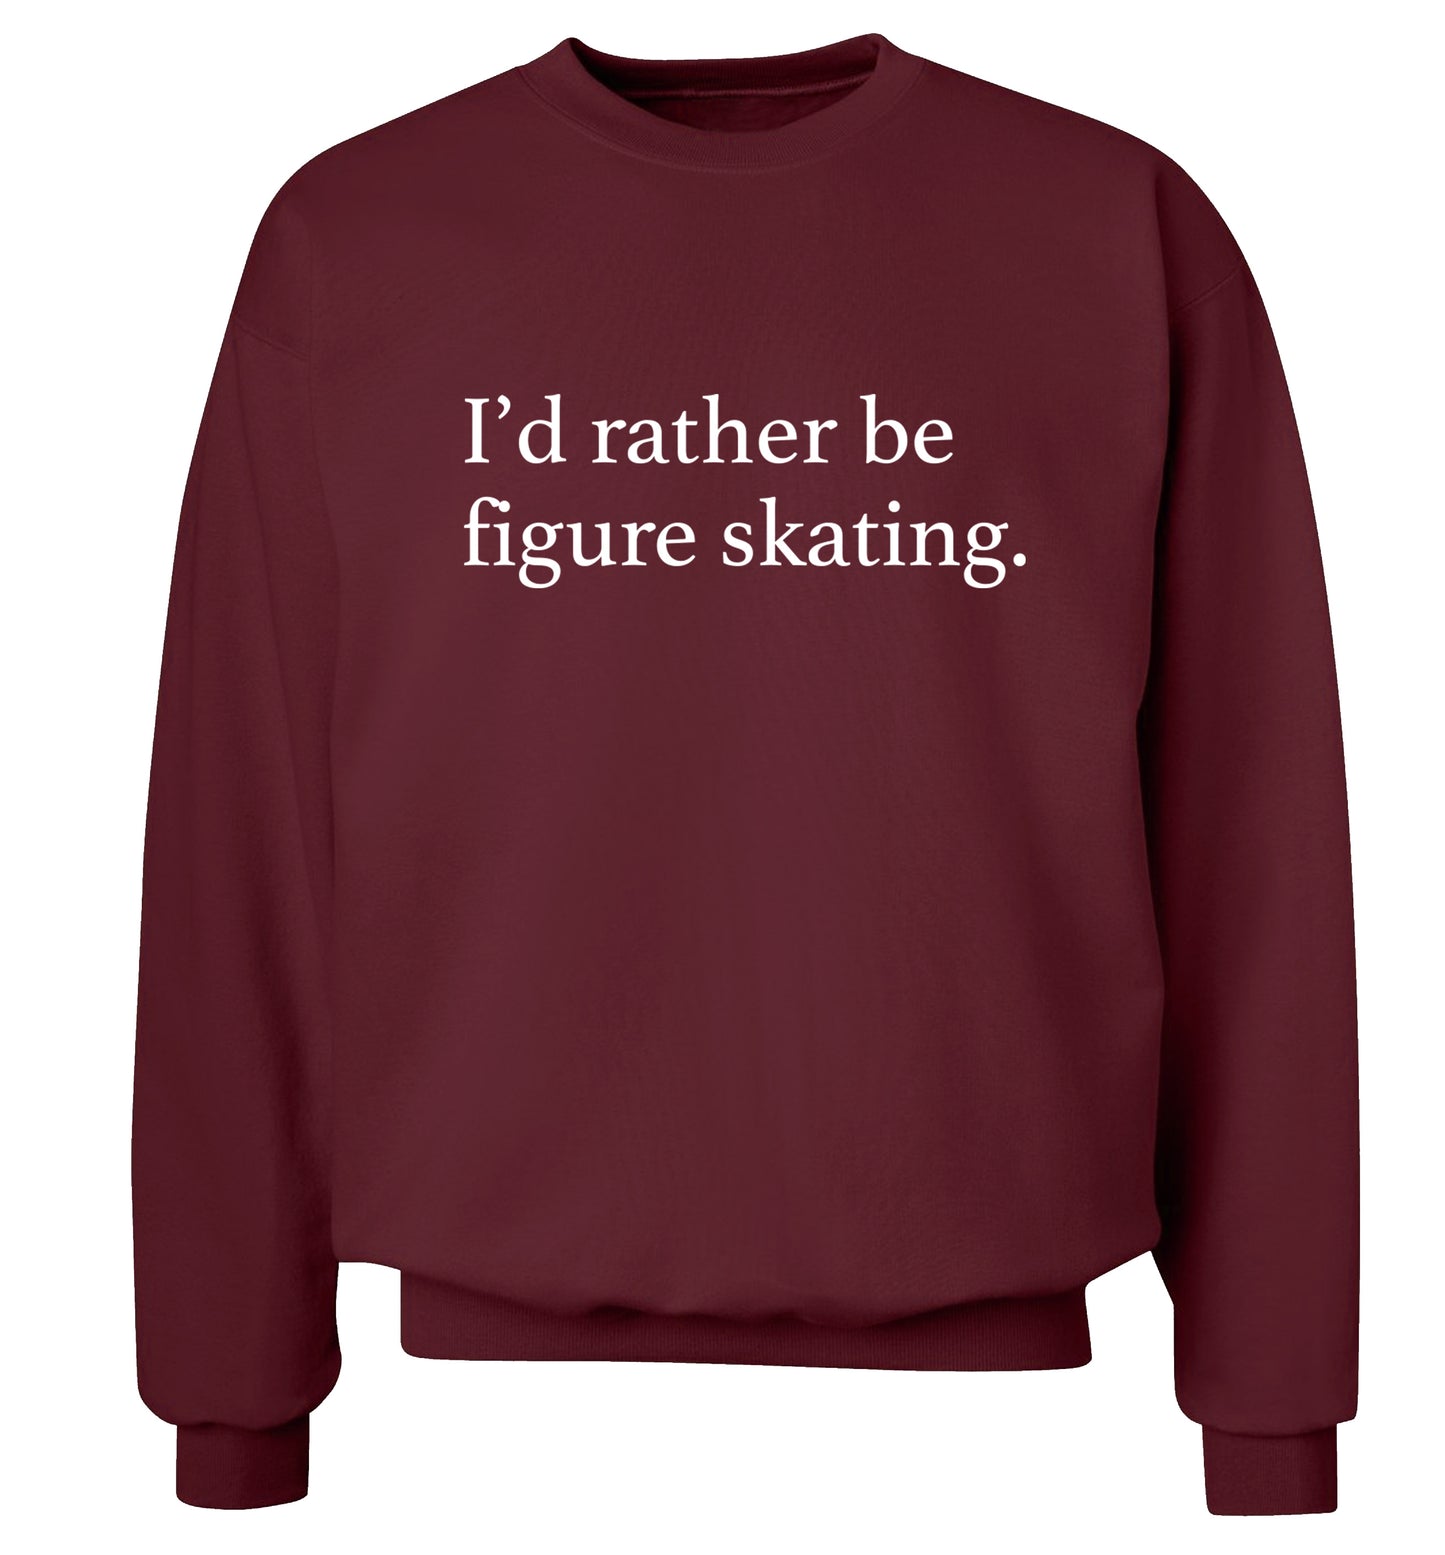 I'd rather be figure skating Adult's unisexmaroon Sweater 2XL